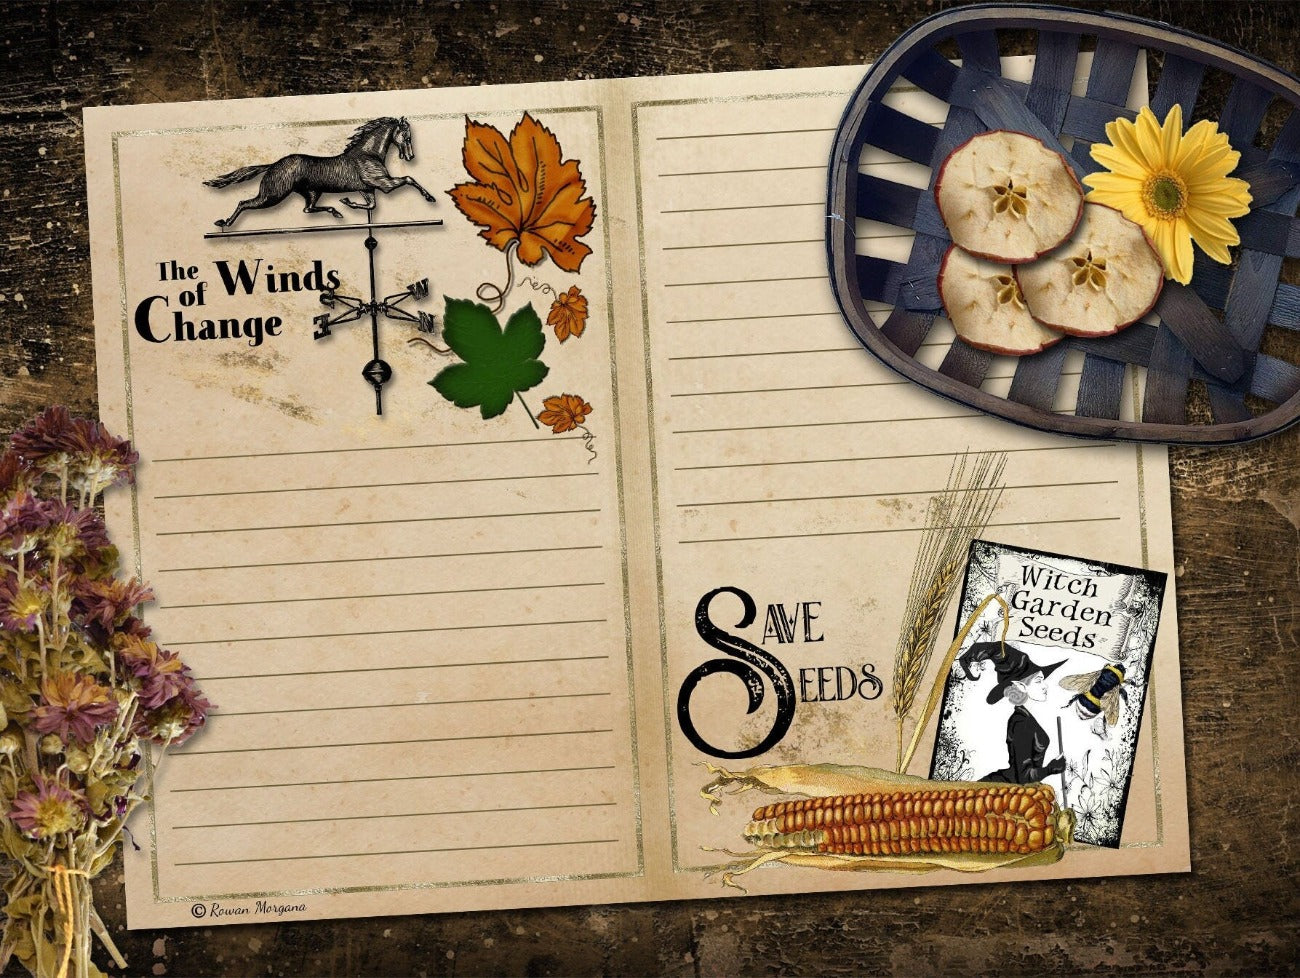 The Winds of Chate and Save Seeds - LUGHNASADH JUNK JOURNAL Kit Printable Pages - Morgana Magick Spell